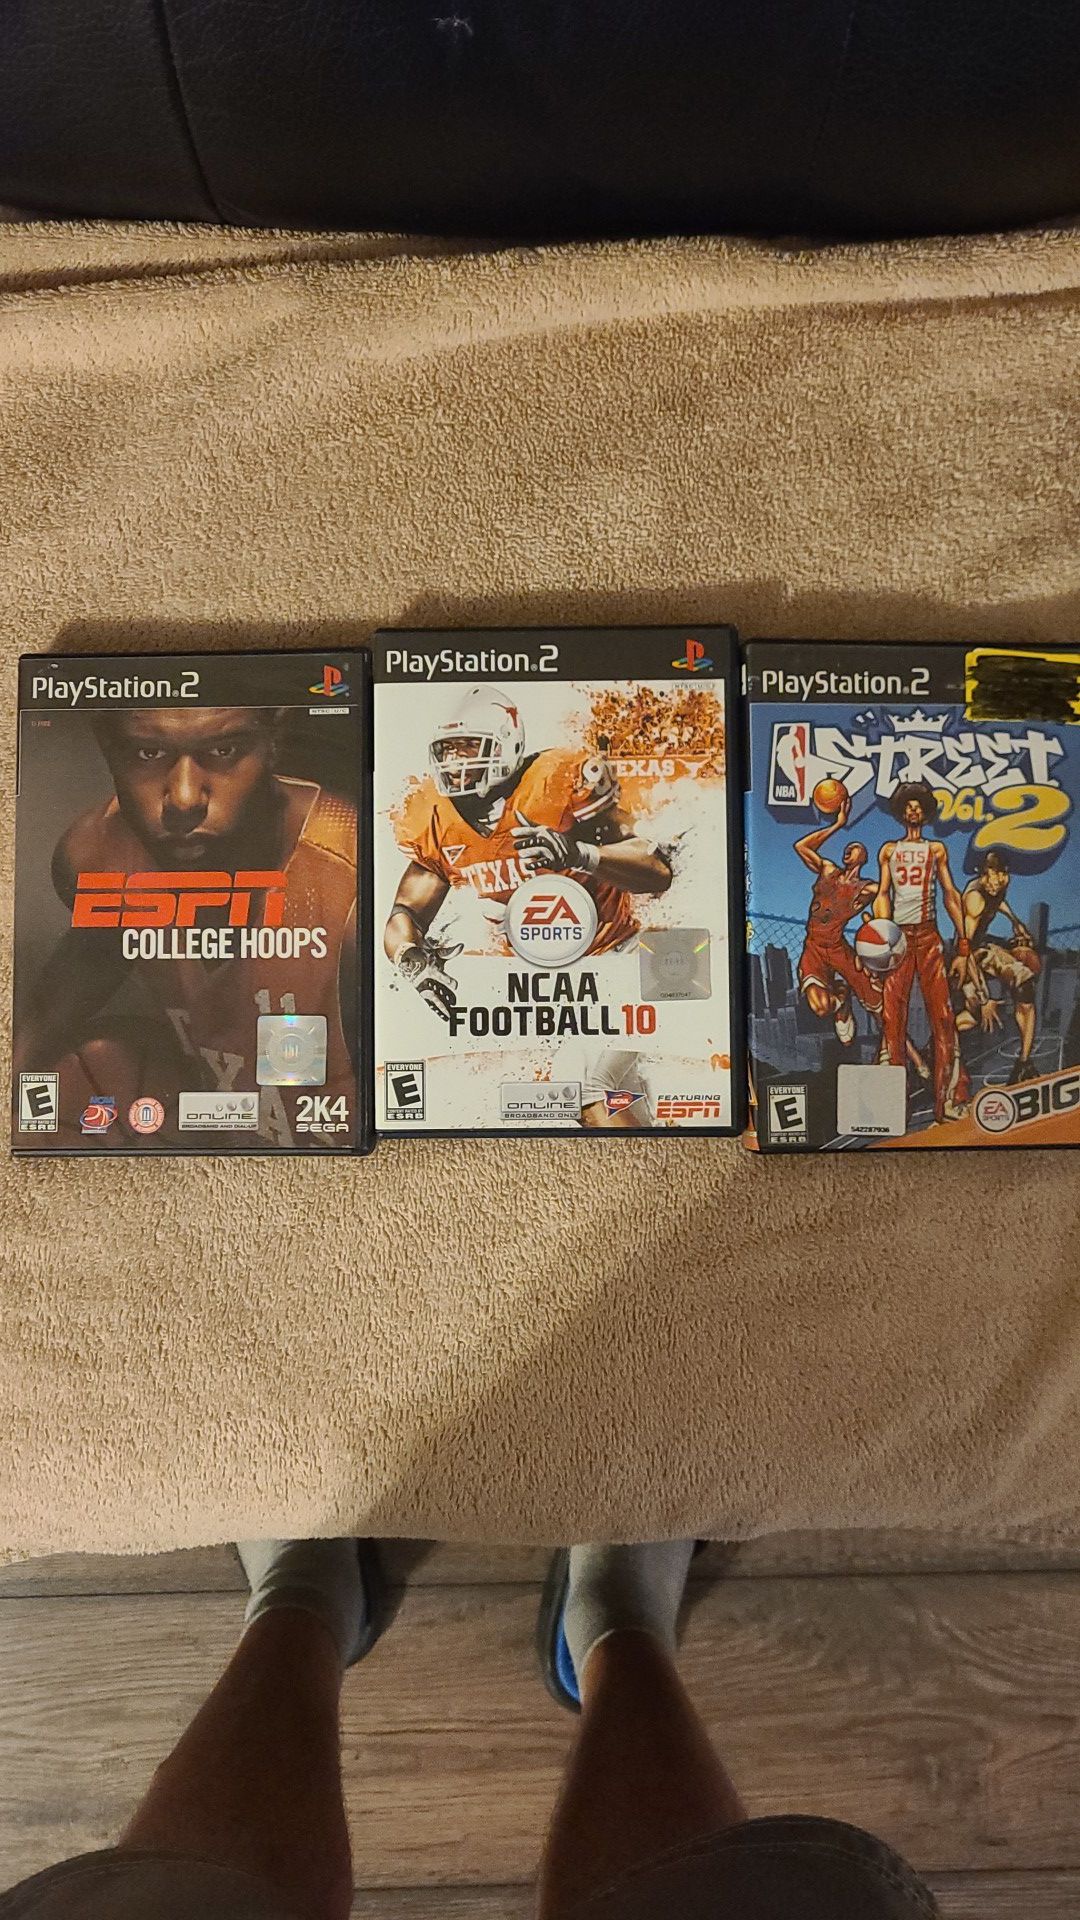 3 ps2 sports games ncaa 10 football Street basketball vol.2 and ESPN 2k4 college hoops